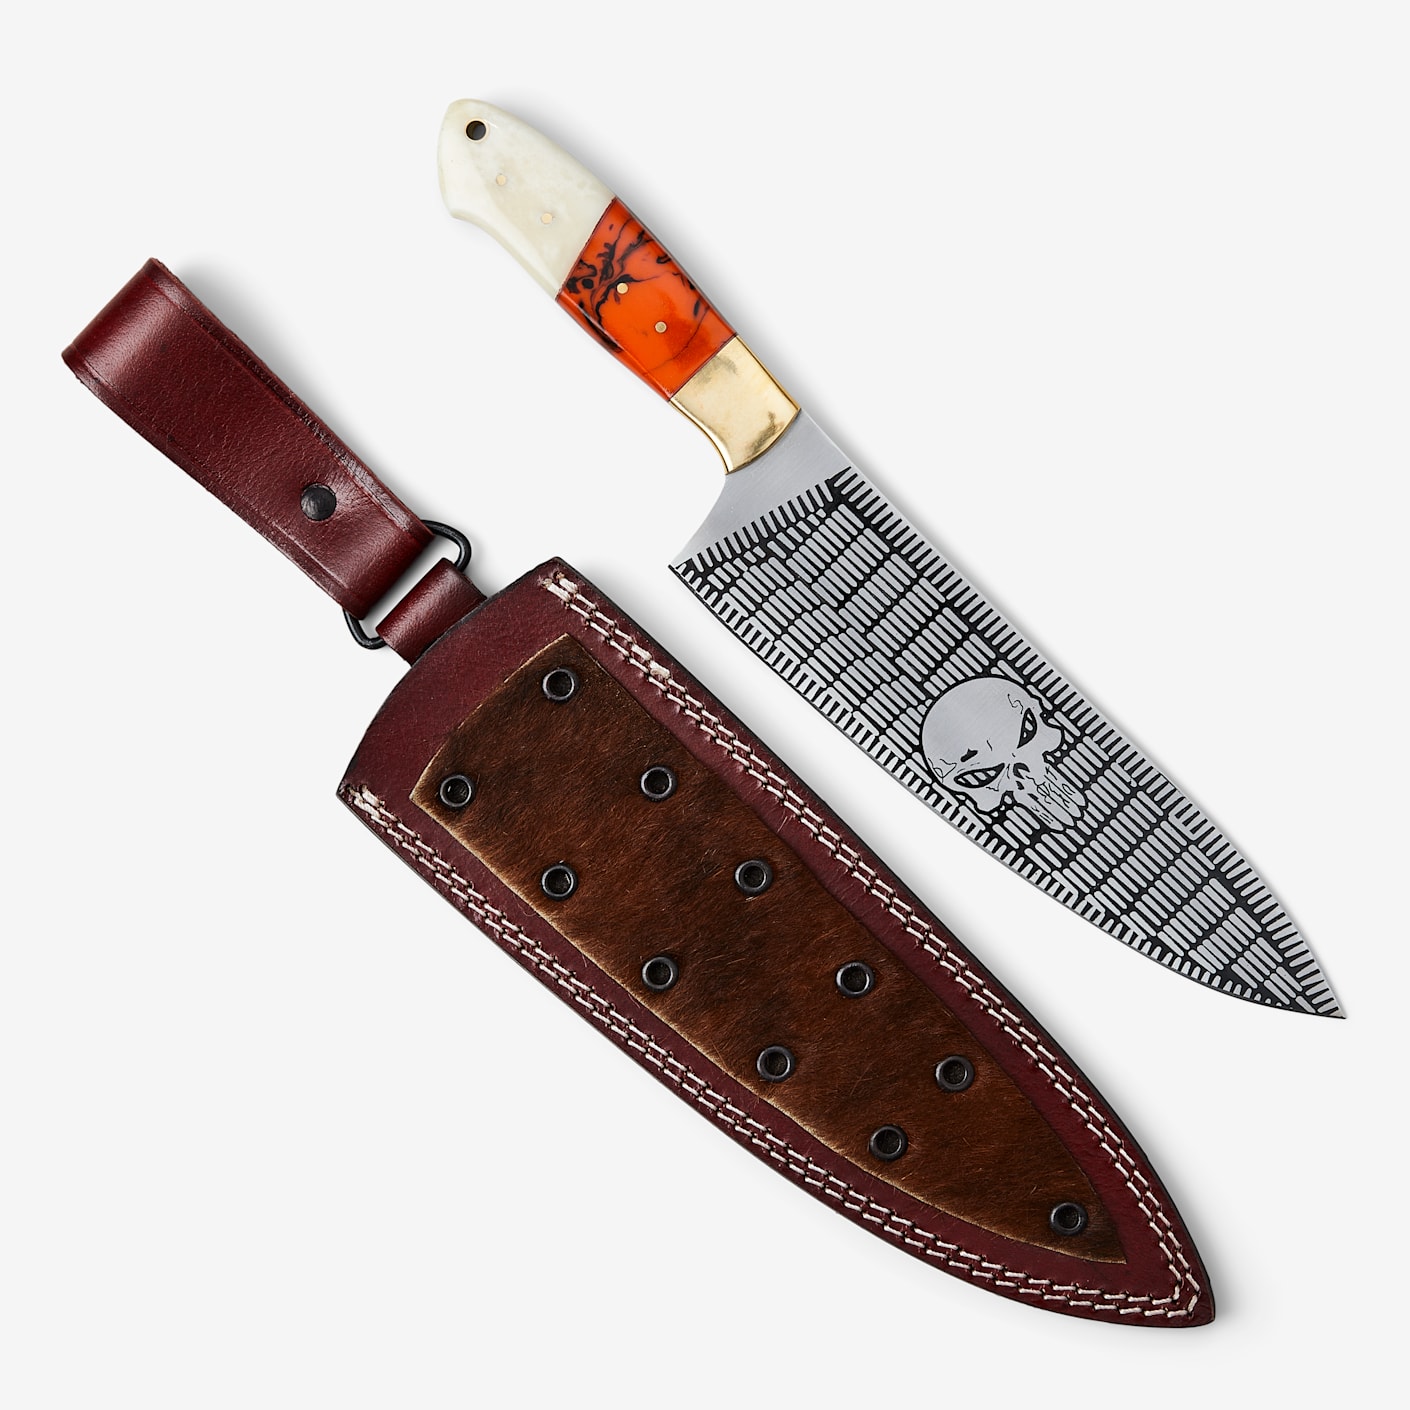 https://dam.bespokepost.com/image/upload/c_limit,dpr_auto,f_auto,q_auto,w_1410/v1/Storefront/2023/07-july/in-house/black-forge-knives-etched-steel-and-bone-chefs-knife_1